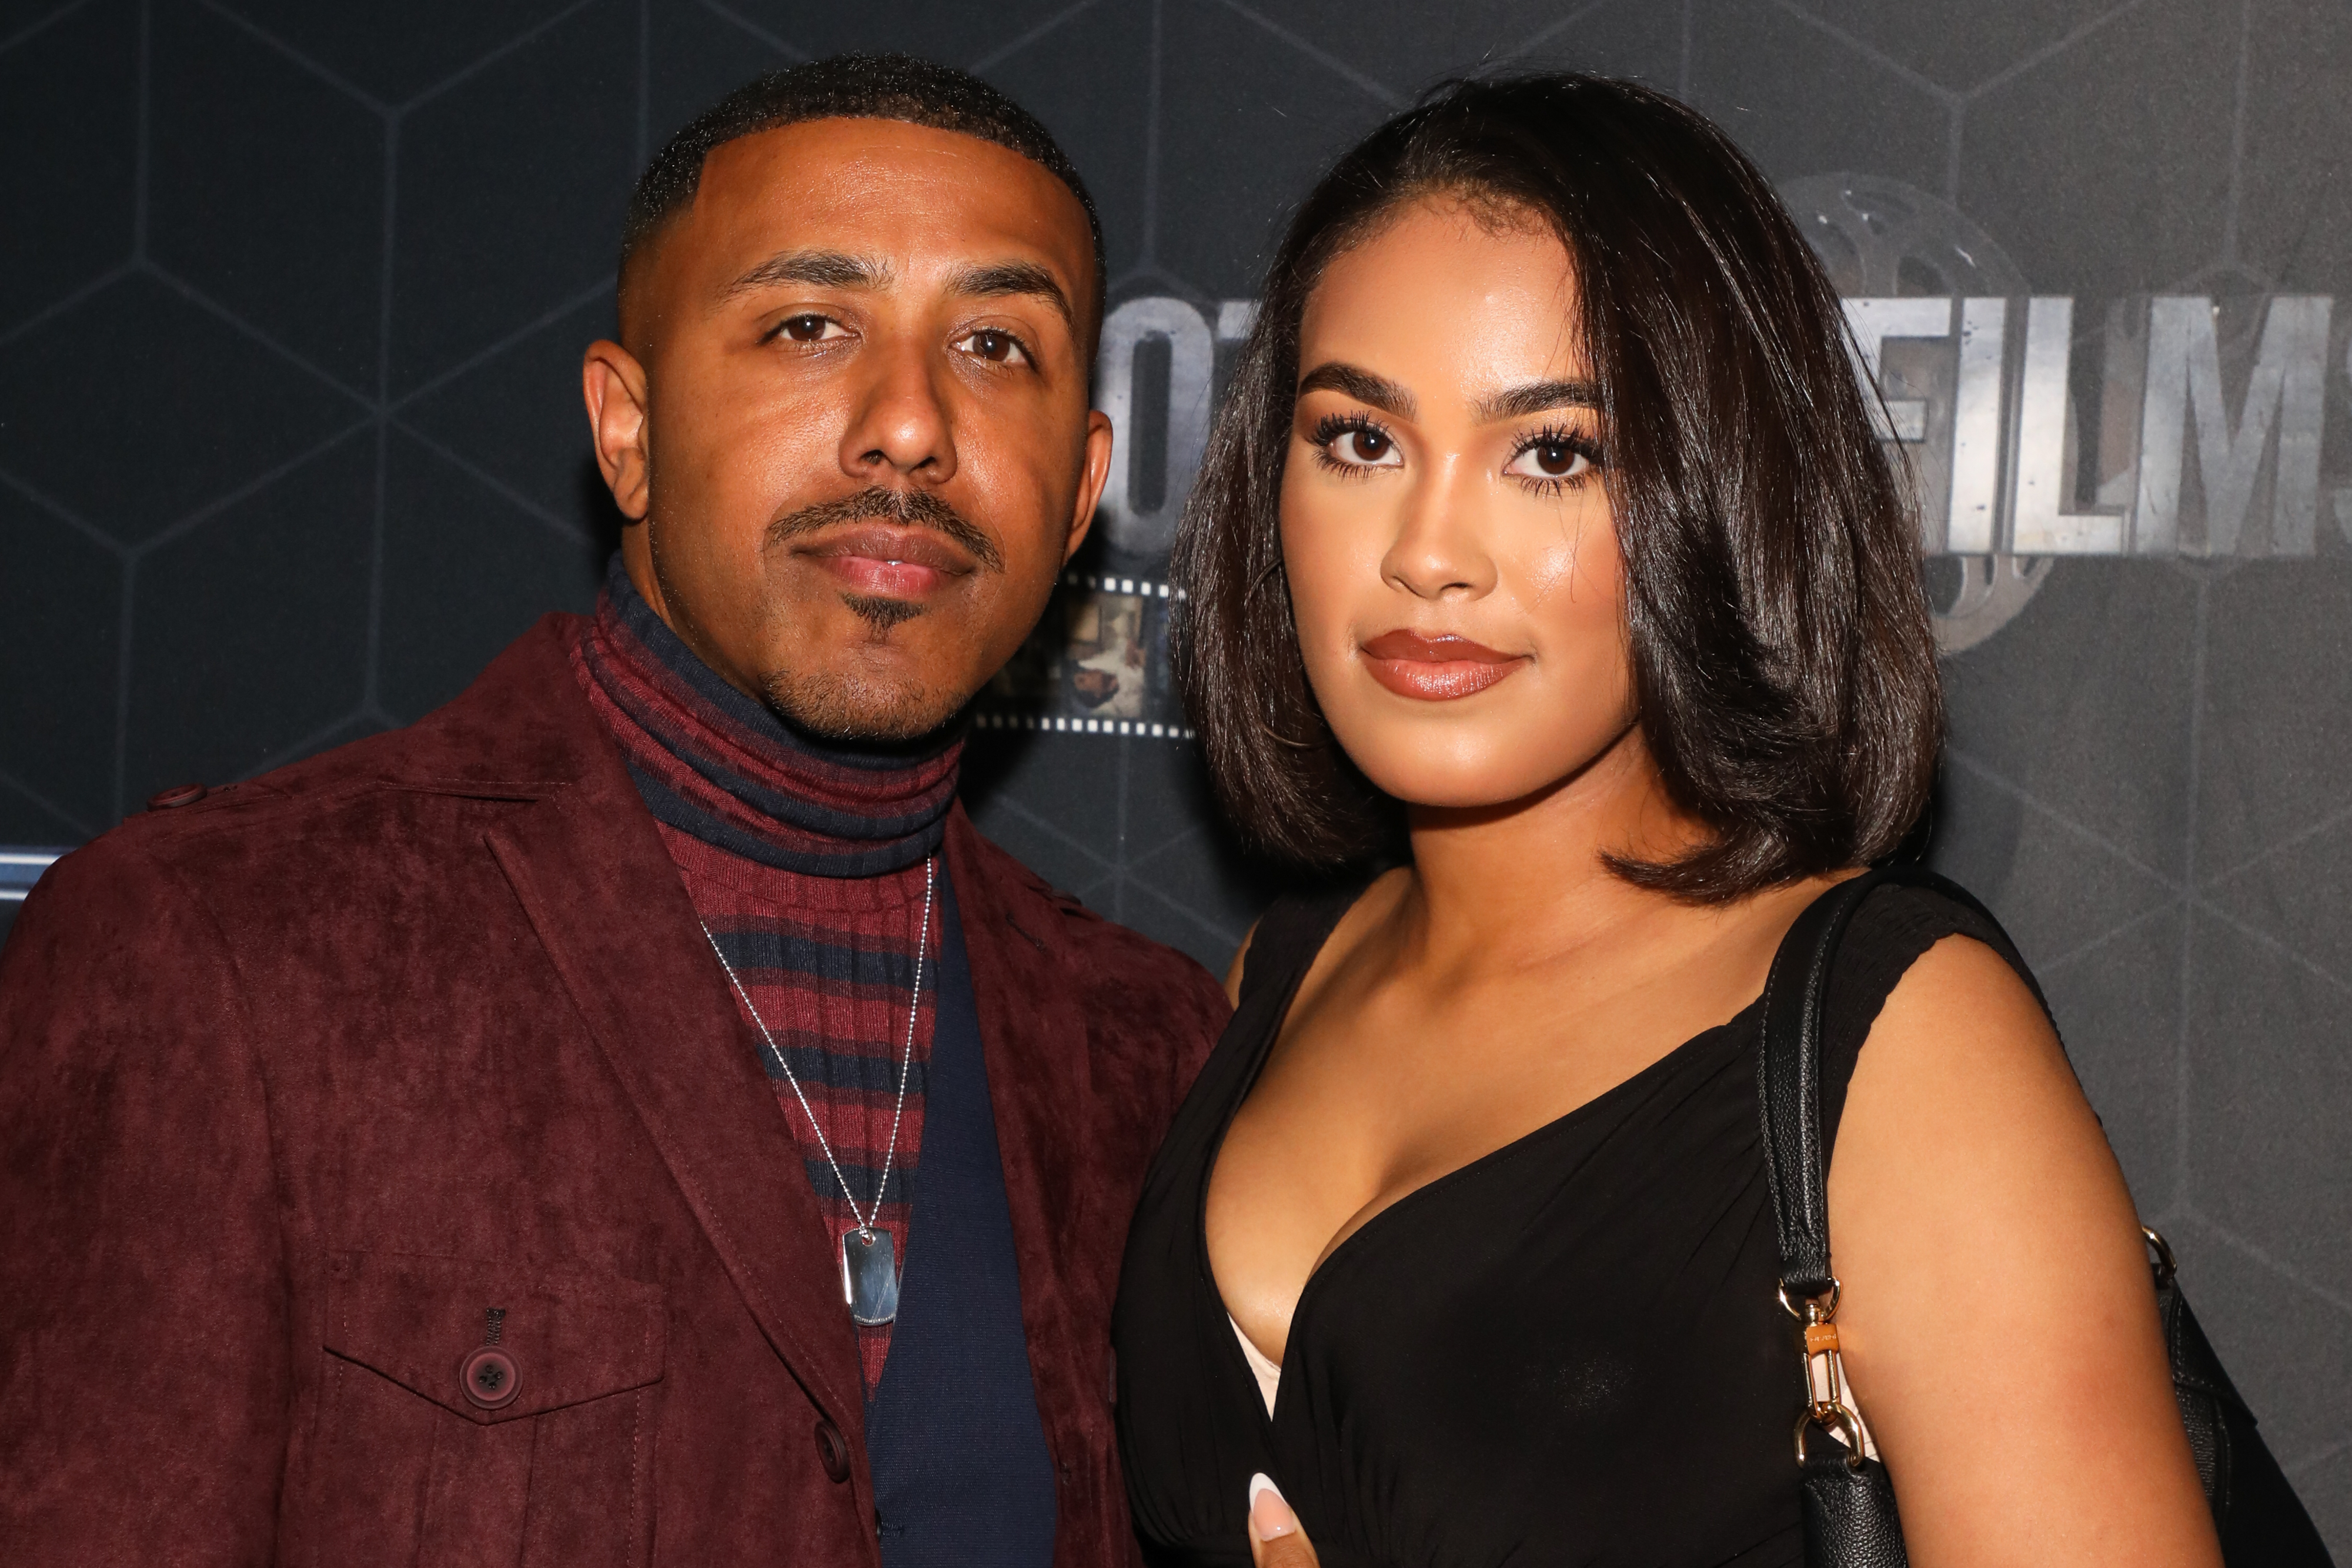 <p><span>Actor and R&B singer Marques Houston married Miya Dickey -- who's nearly </span><a href="https://www.wonderwall.com/celebrity/couples/jon-hamms-secret-long-term-girlfriend-revealed-plus-more-celeb-love-life-news-for-late-june-2020-361114.gallery?photoId=1049459">20 years his junior</a><span> -- in 2020. He was 38 and she was 19 when they </span><a href="https://www.wonderwall.com/celebrity/photos/ashley-benson-comforts-cara-delevingne-after-chanel-show-plus-more-news-3018685.gallery?photoId=1049459">announced their engagement</a><span> in 2019 after about five months of dating. They've since started a family: Daughter Zara was born in 2021. </span></p><p>In April 2023, the "Sister, Sister" alum -- who was 41 to Miya's 22 at the time -- sparked controversy after he explained why he wanted to marry such a young woman. "A red flag to me [was] always with a woman that had a kid. Nothing against single women," he told Page Six, insisting he "respect[s] women that are raising children on their own." Marques said his father gave him advice on the subject. "I would talk to my dad a lot, and he would always tell me to have your own kids because you never know what the baby daddies are about. So if you're gonna have kids, make sure it is with a woman that never had kids. So that was always my red flag... and a woman with an attitude. I don't like women with funky attitudes." </p><p>According to Marques, he wanted to settle down with a young woman because "Women that are my age... they kind of have a different outlook on life. Like a lot of women my age are very independent. They are very like, 'I don't need a man to do this for me 'cause I can do it for myself.' I come from a generation that I love to provide for my wife." He insisted that Miya's age wasn't her only appeal. "[She] caught my heart. Everything that I prayed for — and everything that I wanted in a woman — she came with," he said. "Although she was young, I'm young in spirit." </p>